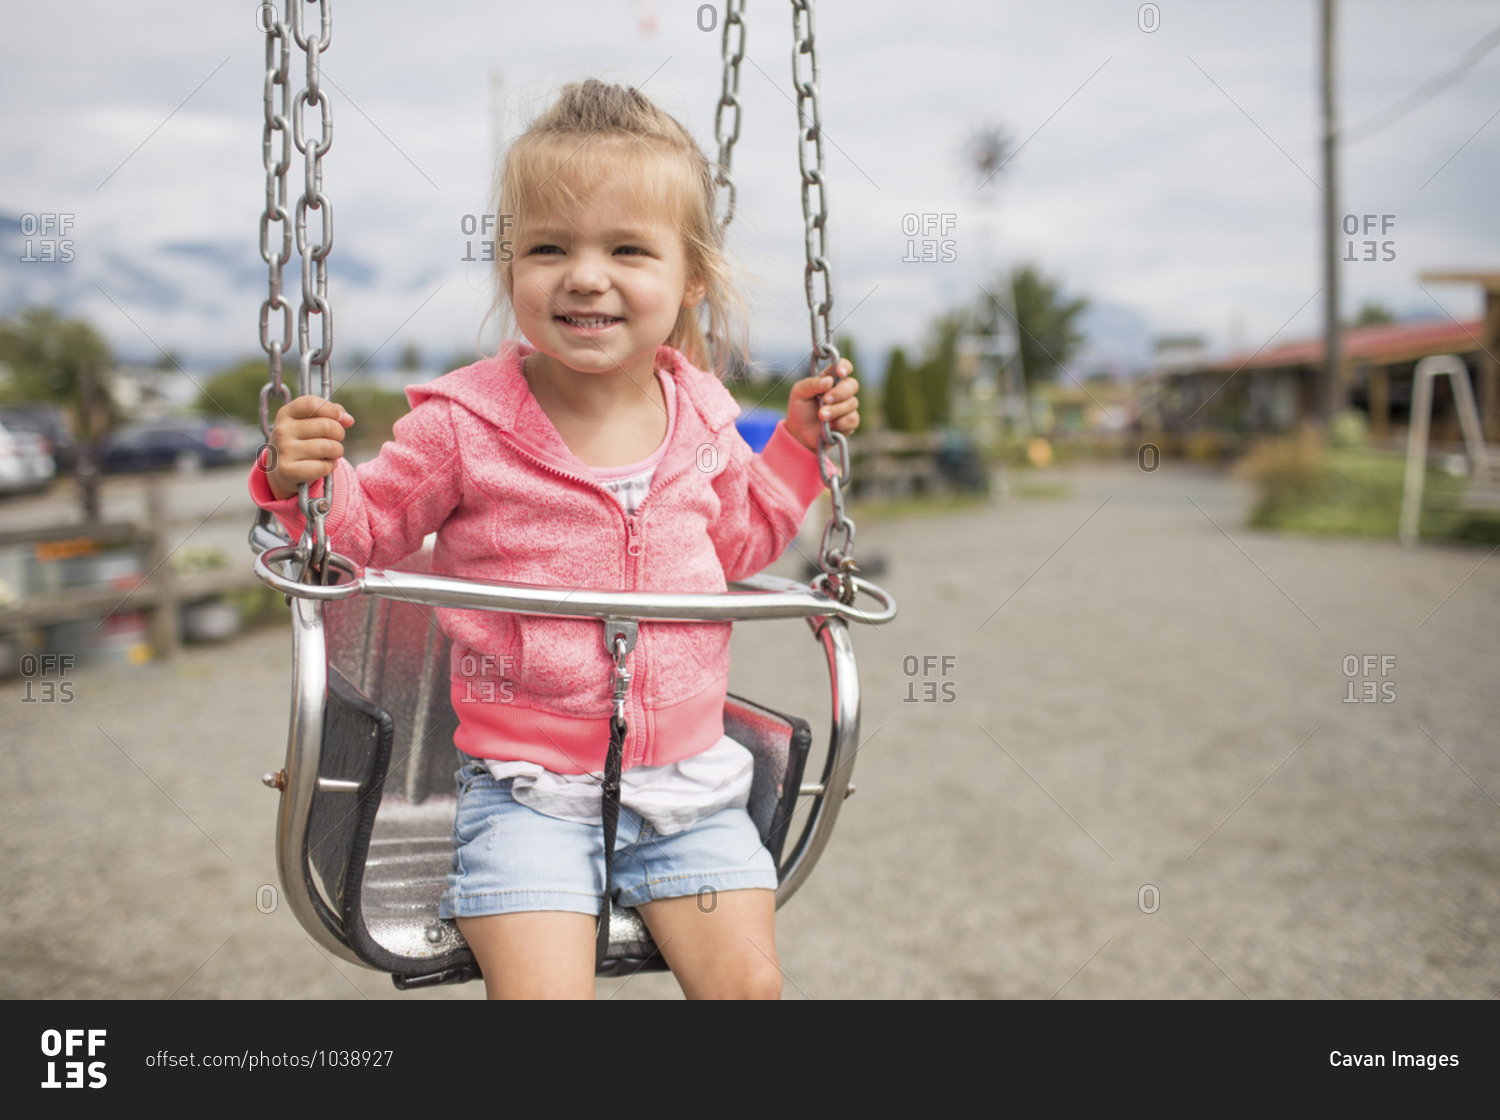 Cute young girl sitting on metal swing outside.